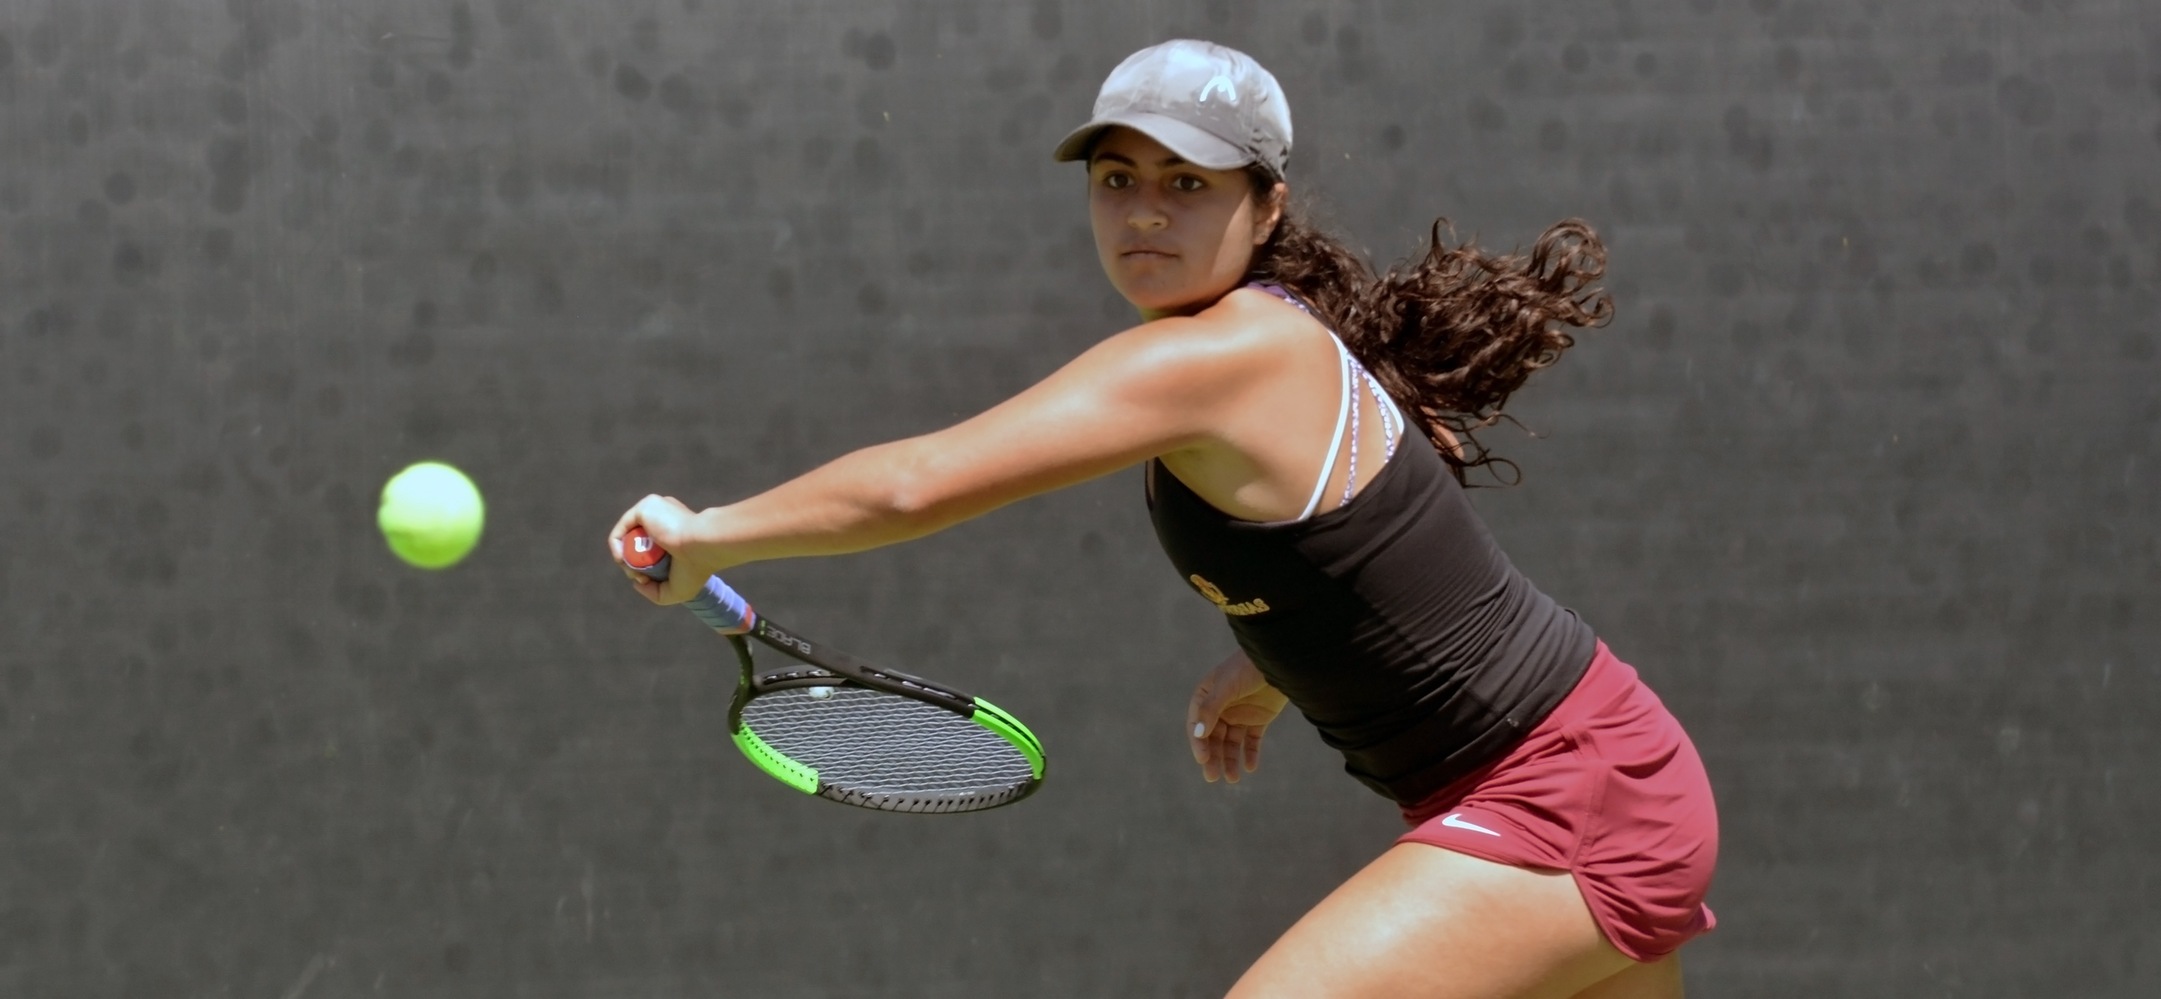 Sarah Bahsoun picked up an 8-1 win in doubles and a 6-1, 6-3 win in singles to sweep the day